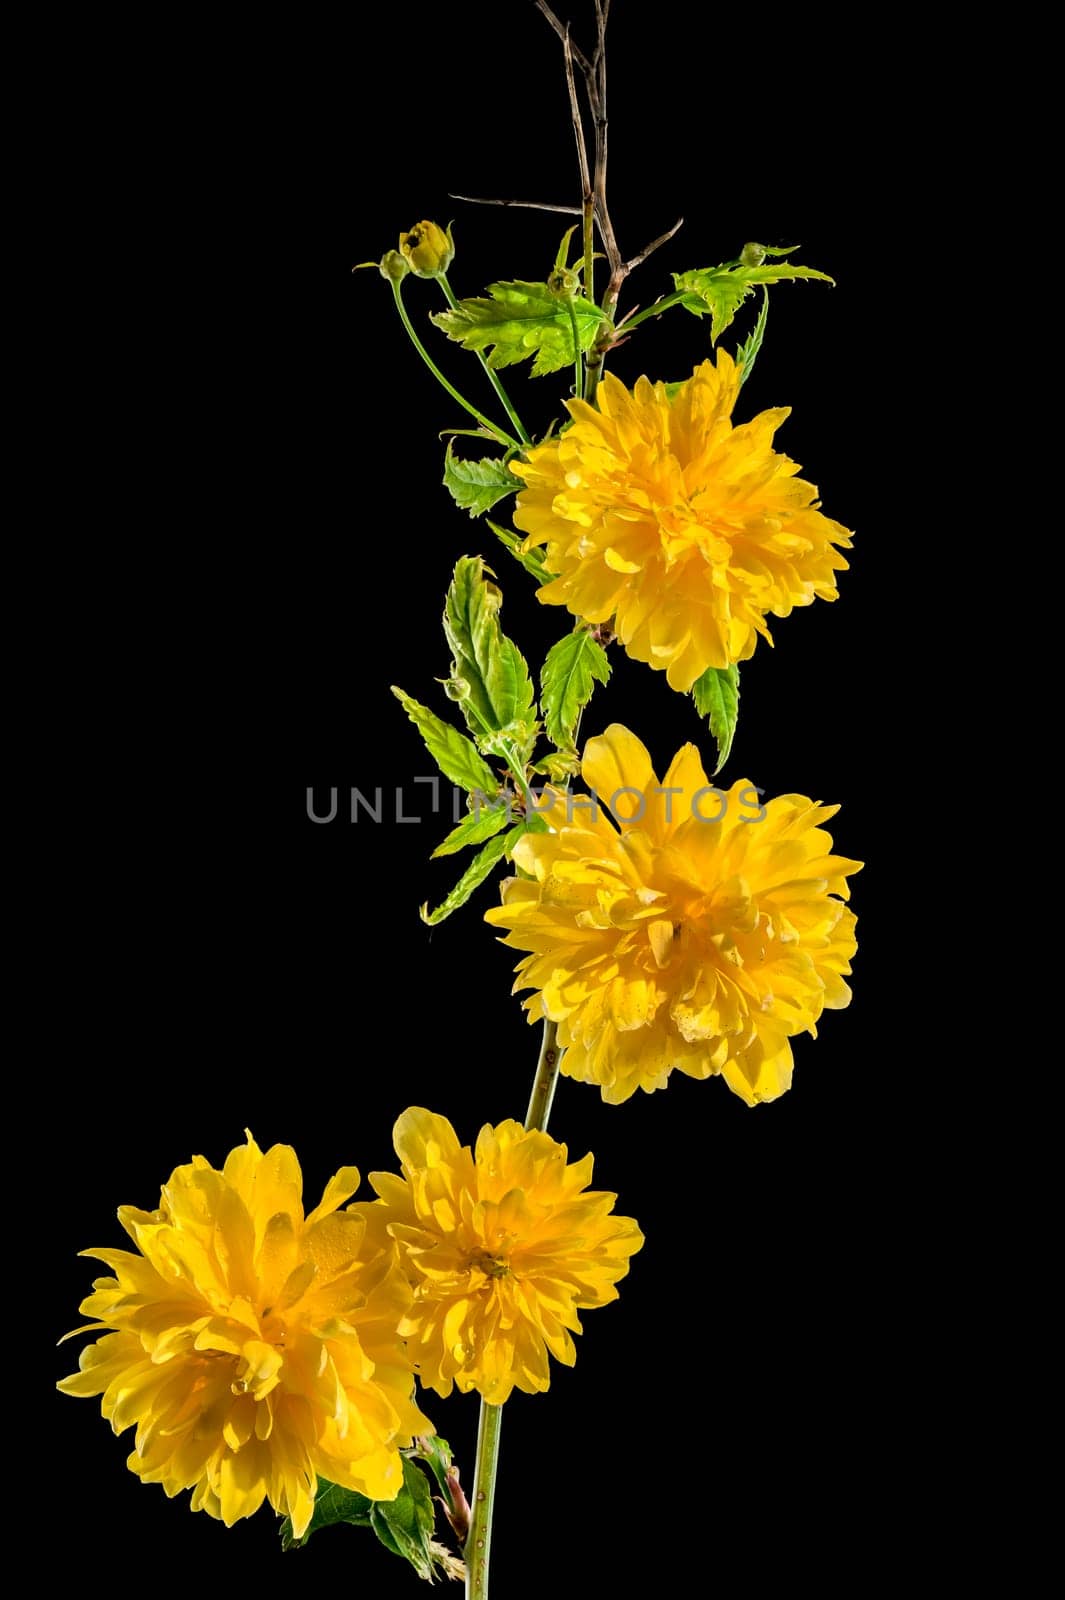 Blooming kerria japonica flowers on a black background by Multipedia